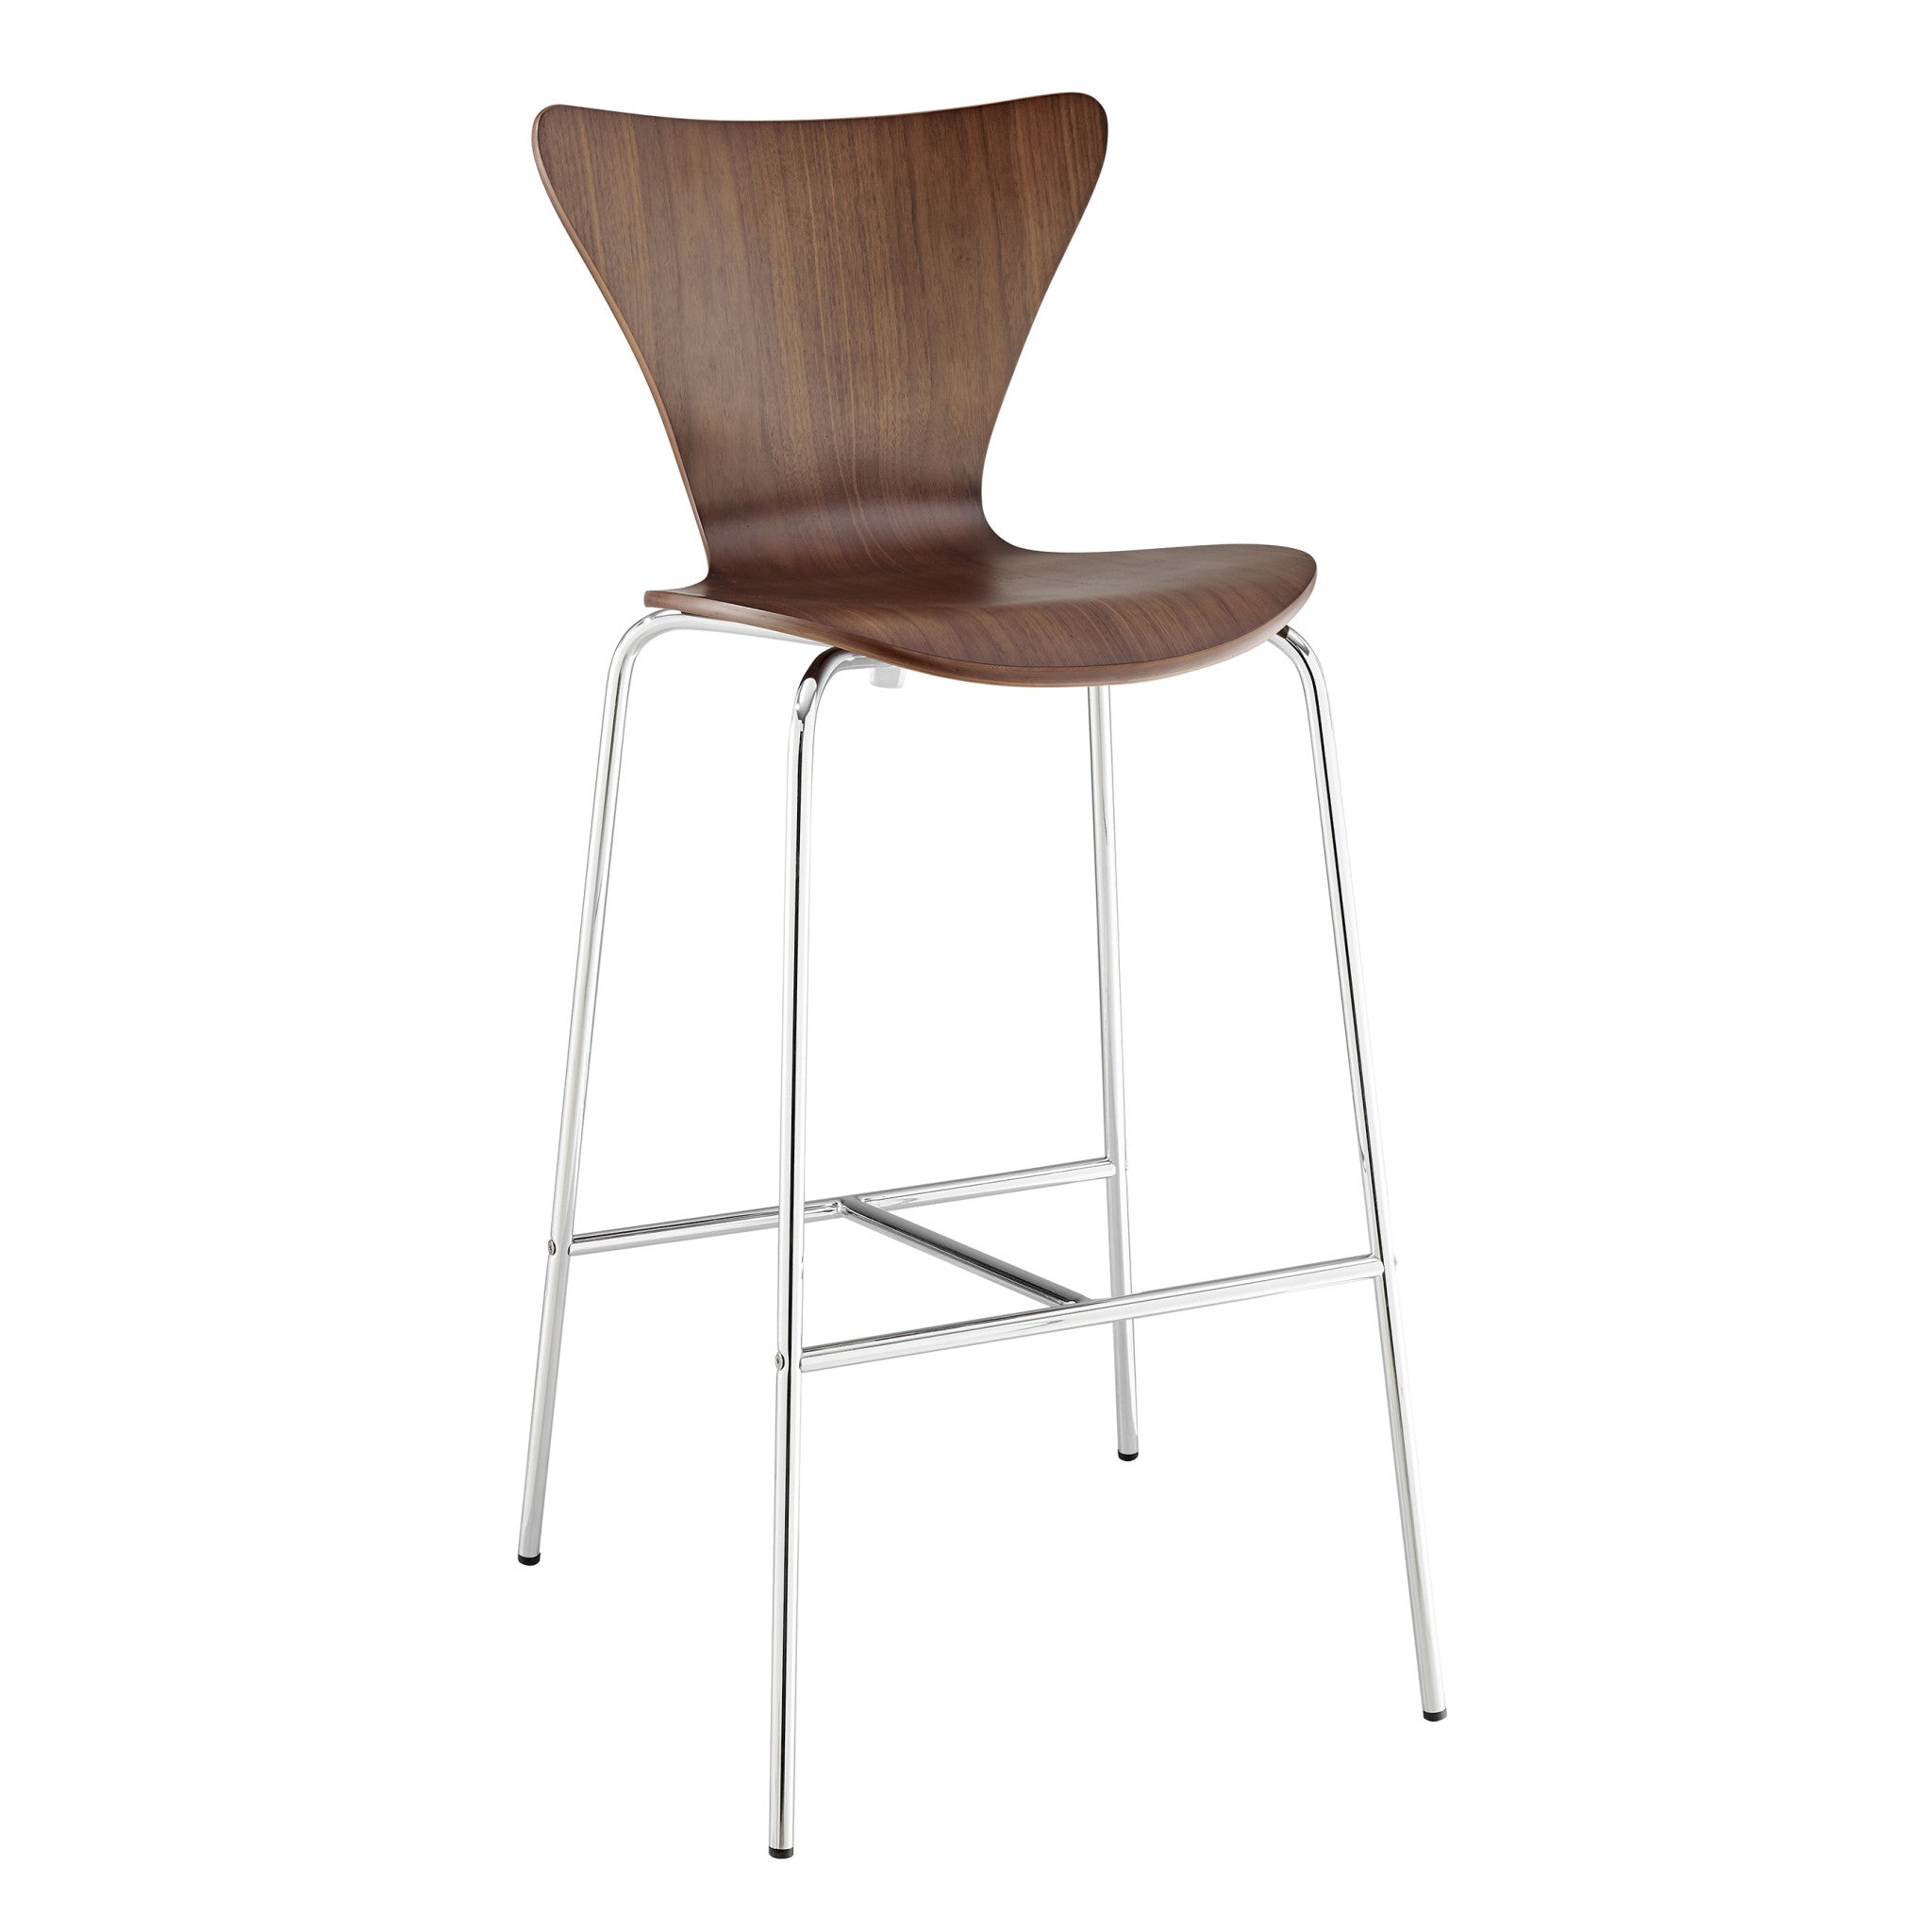 30" Brown And Silver Metallic Stainless Steel Bar Chair